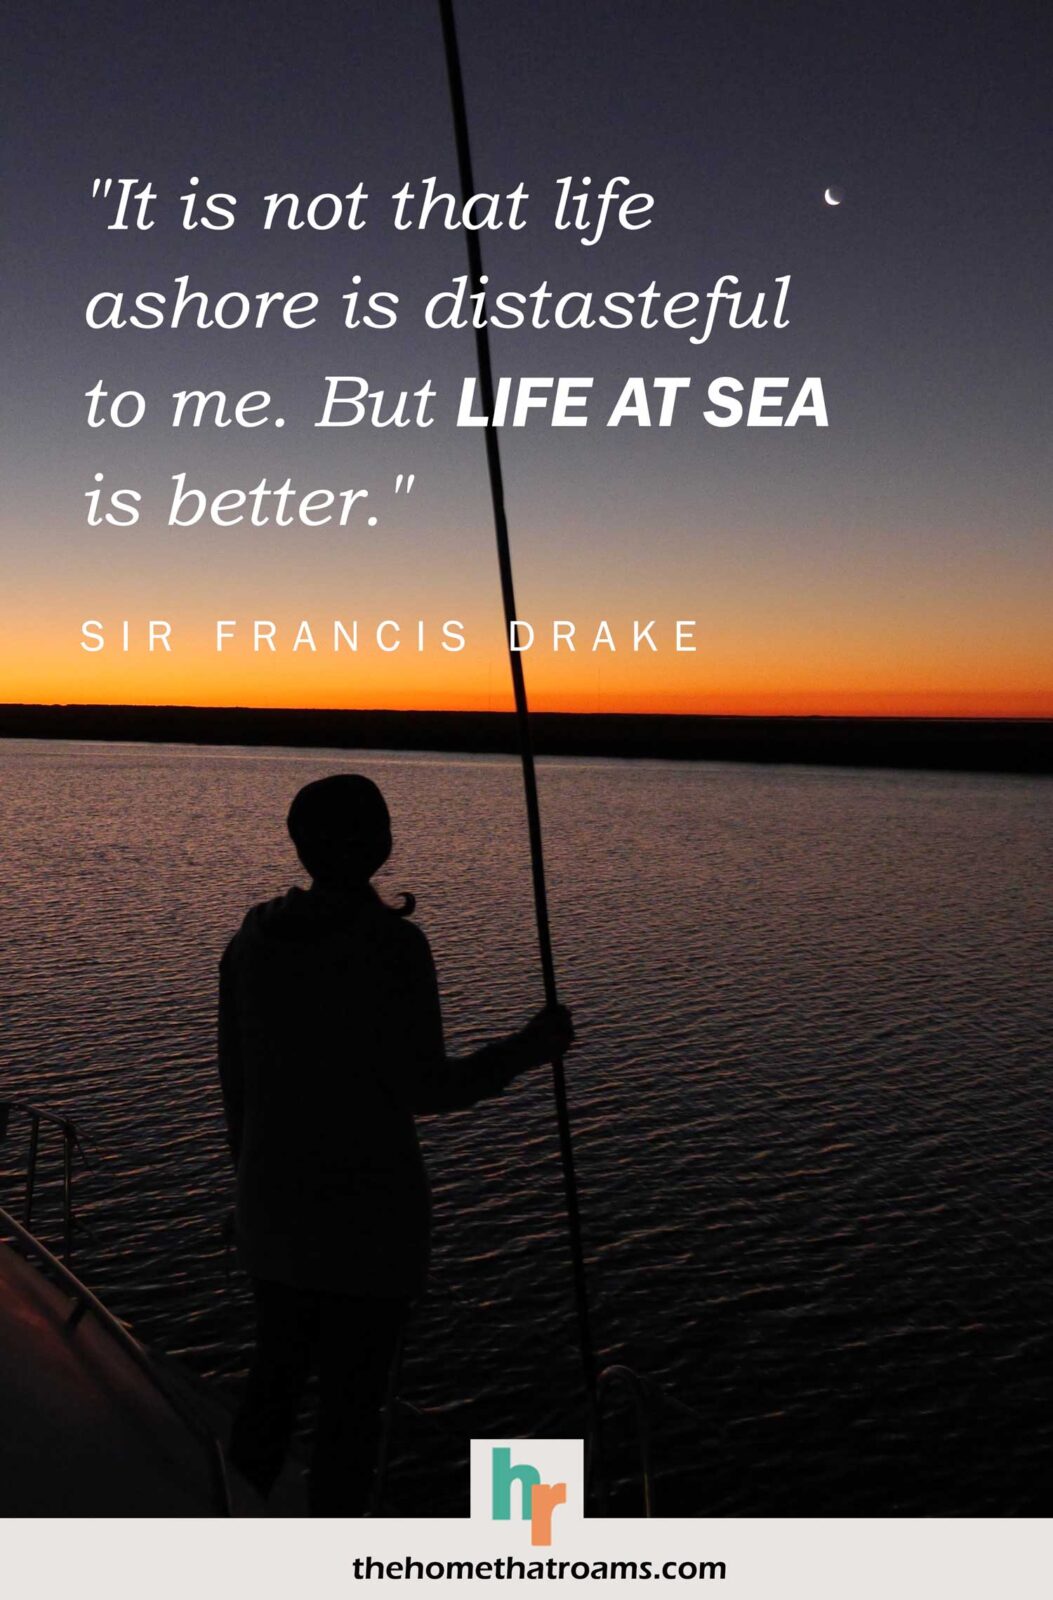 Inspirational sailing away quote, “It is not that life ashore is distasteful to me. But life at sea is better.” - Sir Francis Drake, written above a woman holding a main stay looking at the colors across the water at twilight.